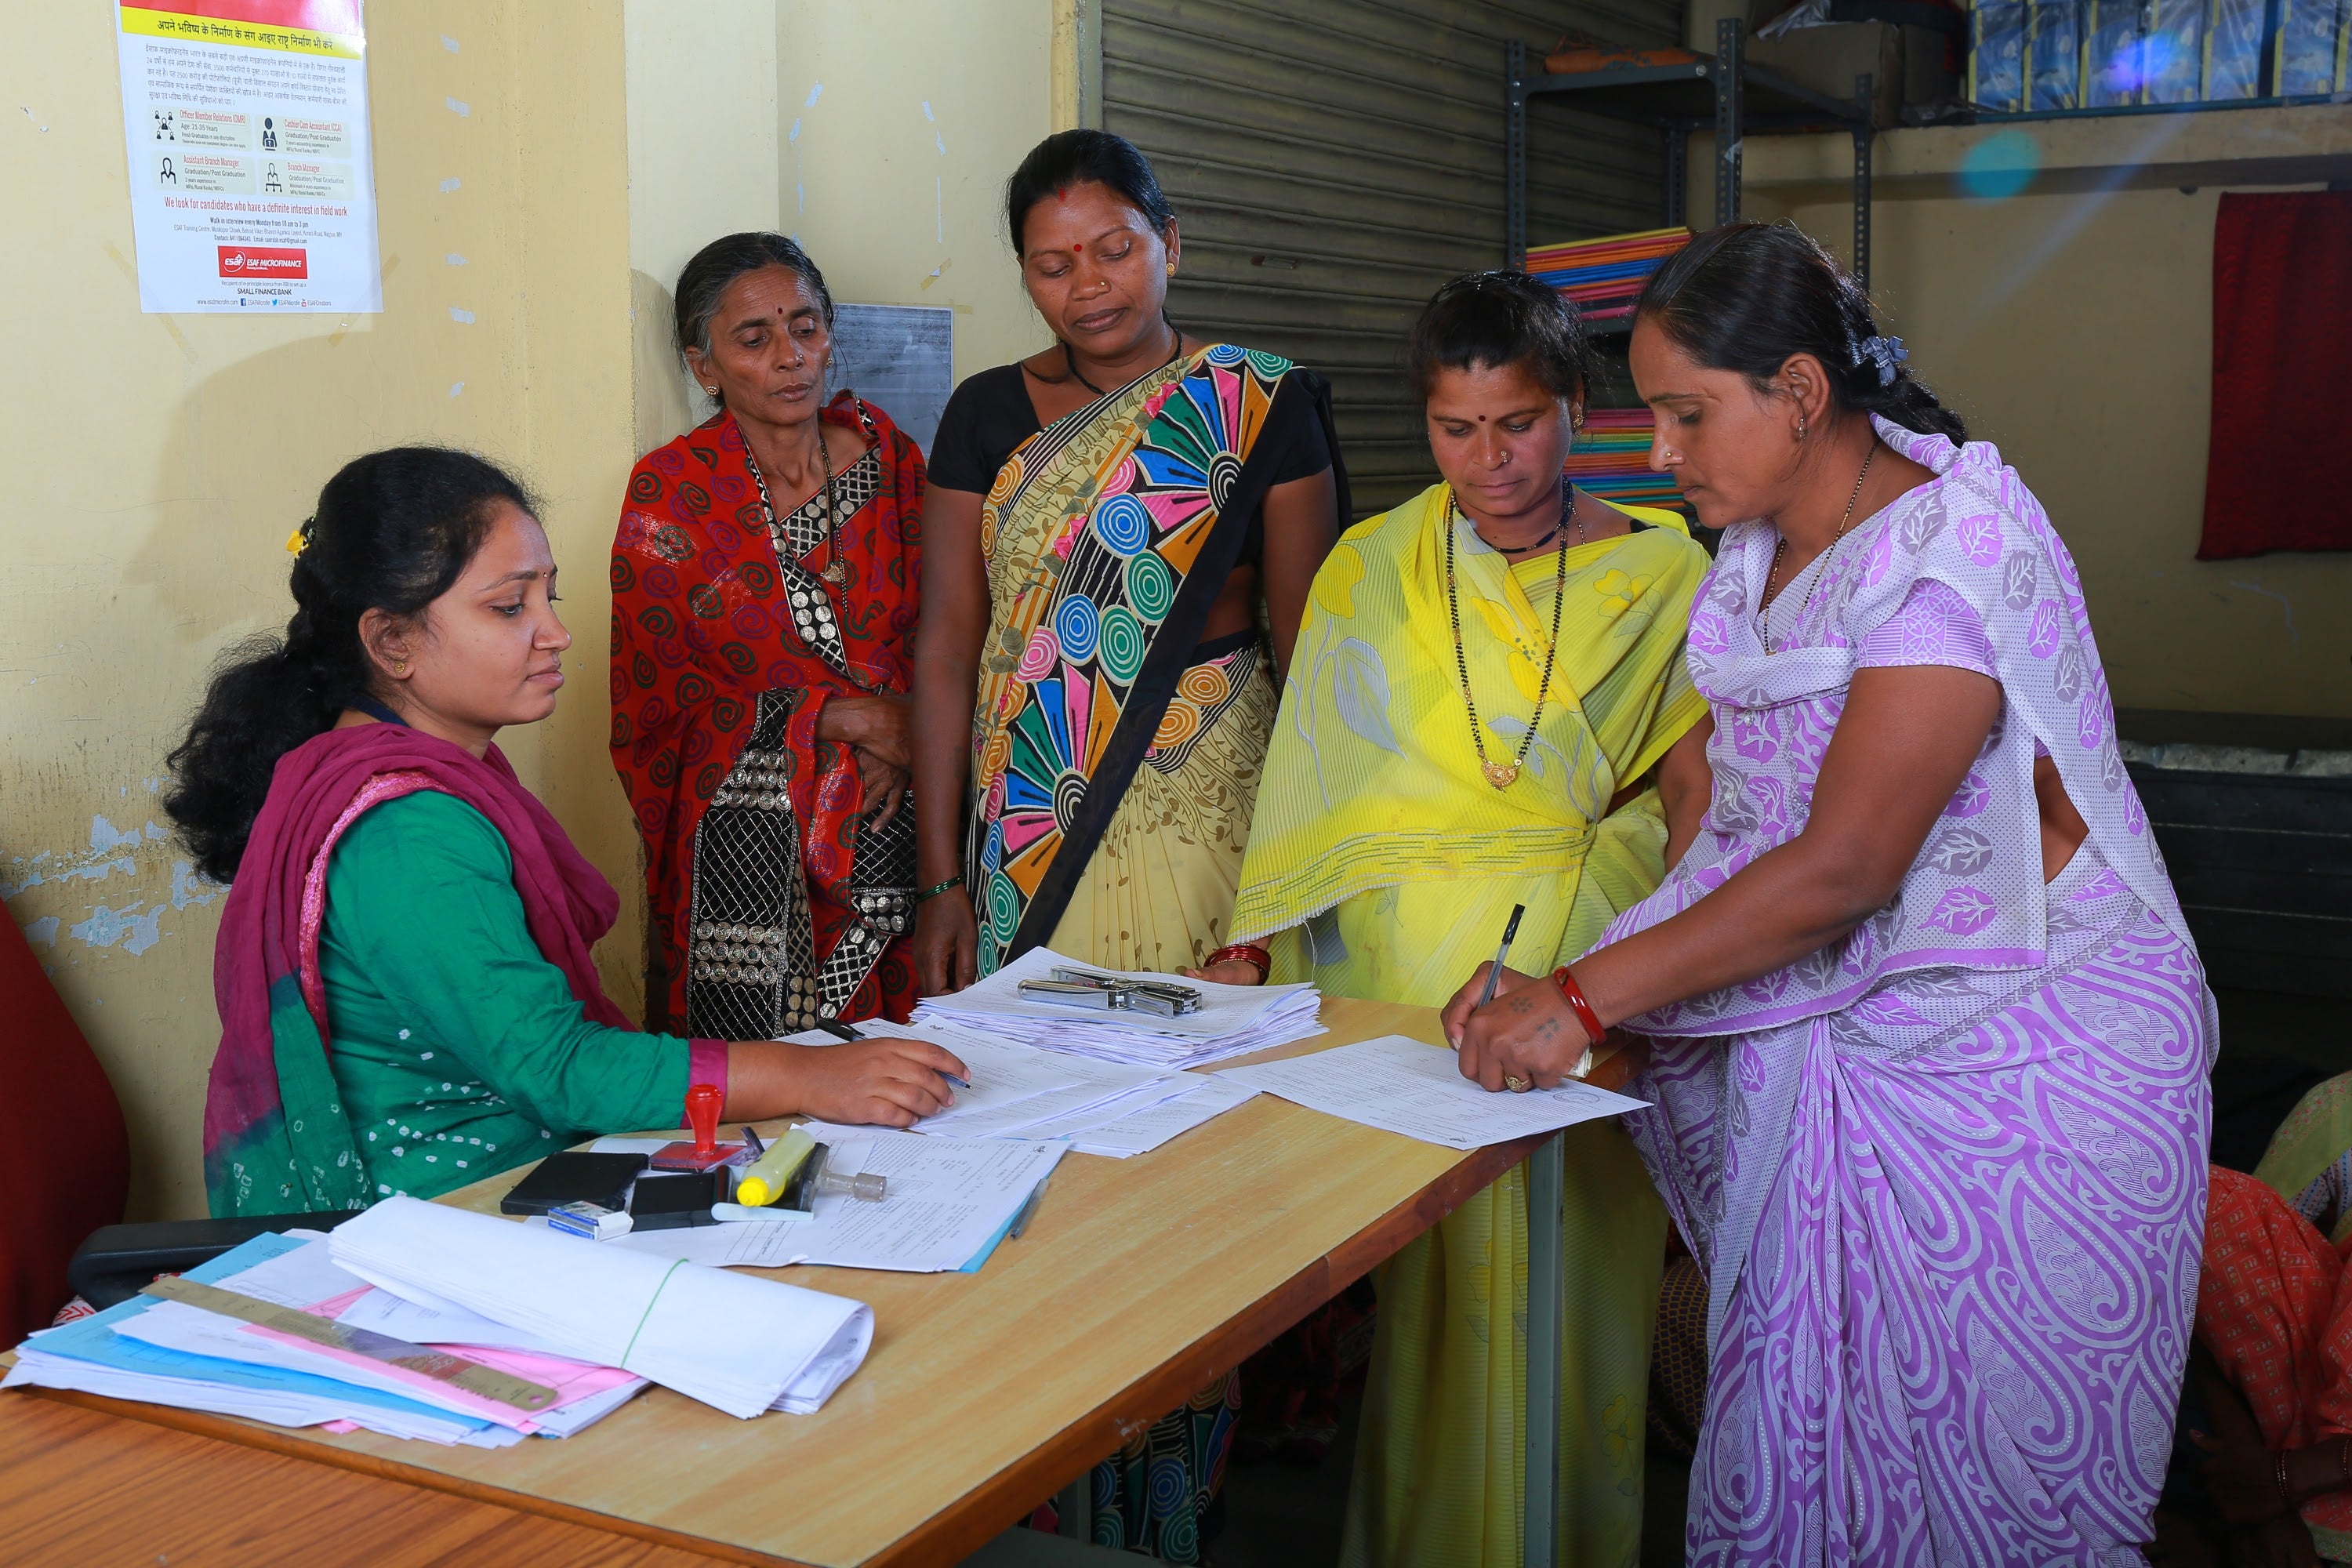 Women in India apply for a bank loan to start a business.